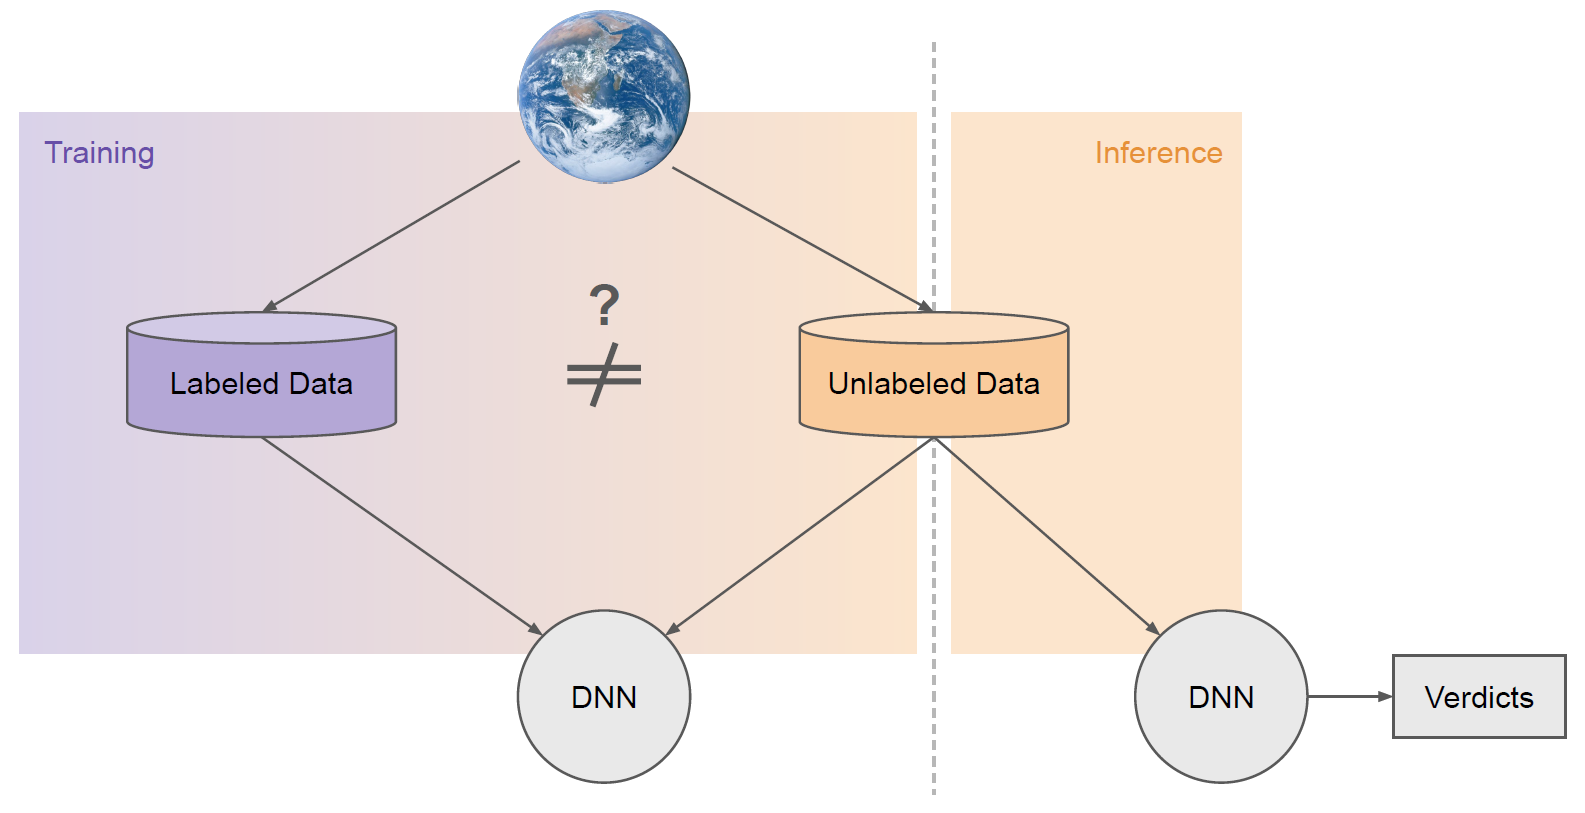 Image 2 is a diagram of the SSL workflow. On the left is the training zone. On the right is the inference zone. On the left: zone Image of the Earth. Two arrows point from it: one to a container of labeled data in the training zone. one to a container of unlabeled data in the training and inference zone. An arrow from both the labeled and unlabeled data containers point to DNN in the training zone. Between them is a does not equal symbol and a question mark. A second arrow leading from the unlabeled data leads into the inference zone and points to a second DNN marker, and an arrow leads from that to Verdicts. 